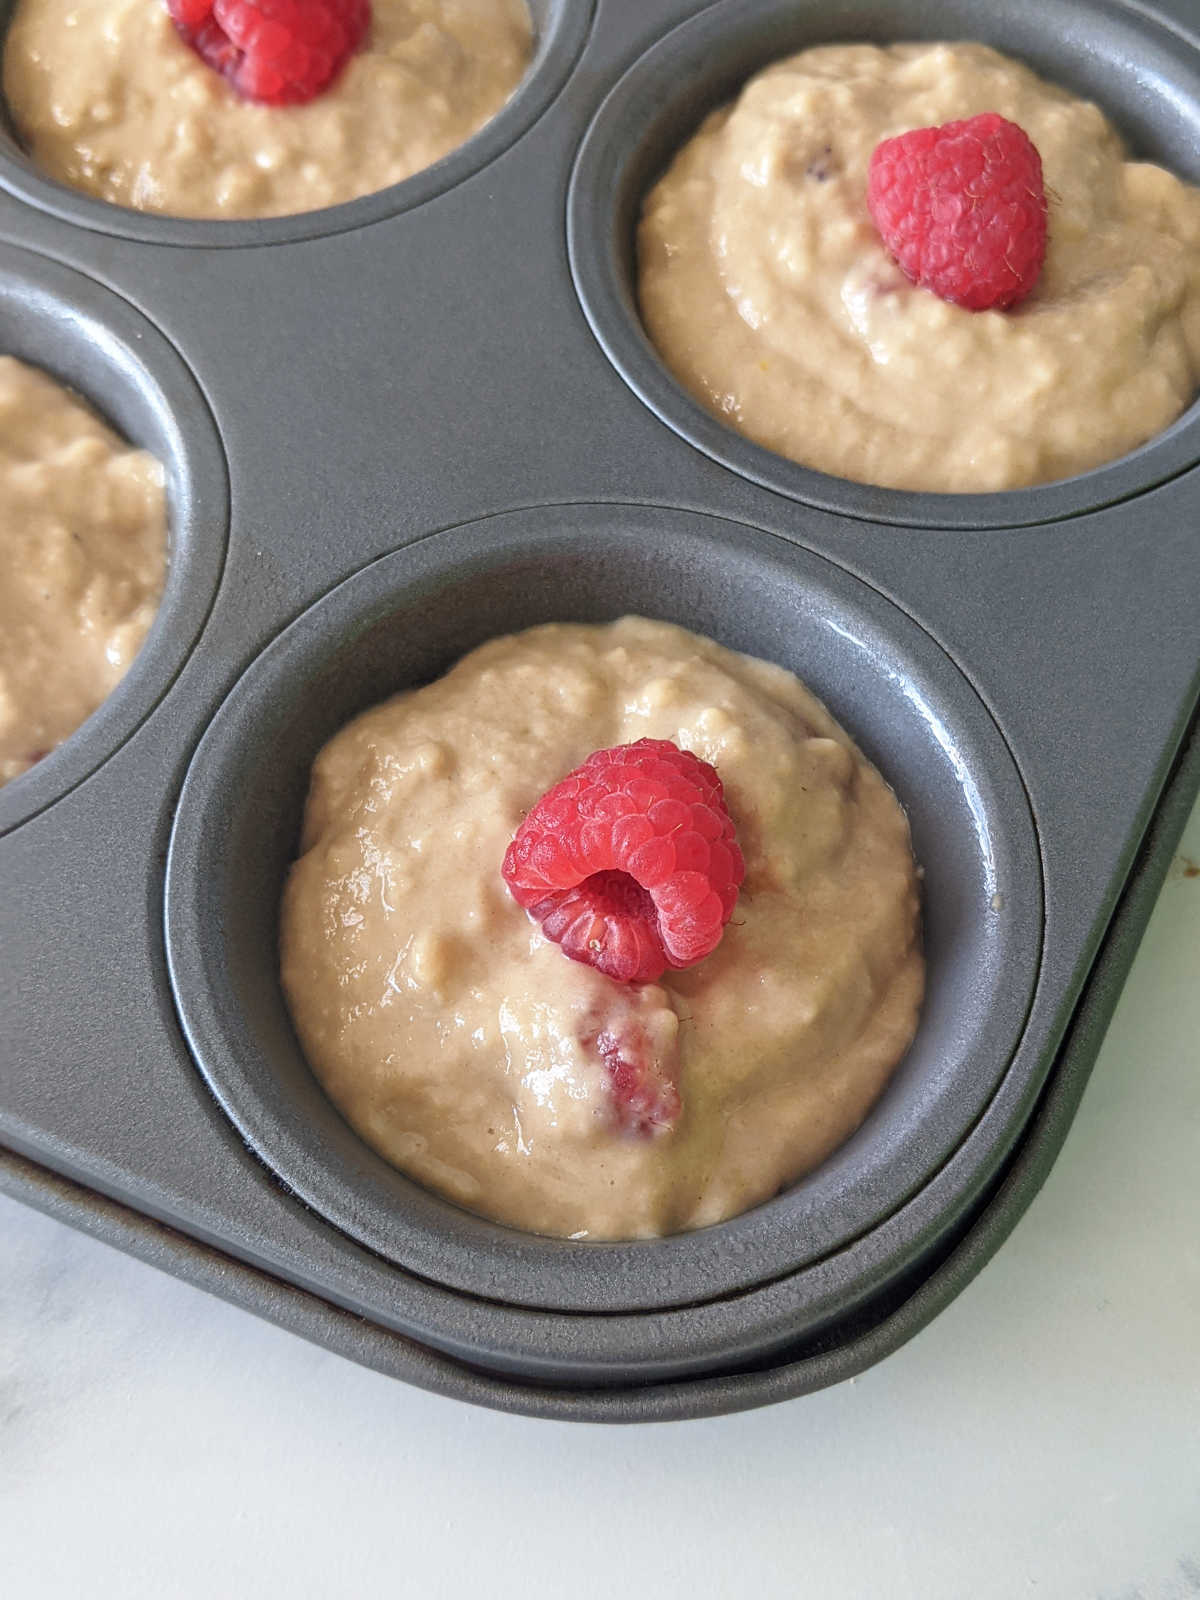 Vegan raspberry muffin batter in a muffin pan topped with a fresh raspberry.